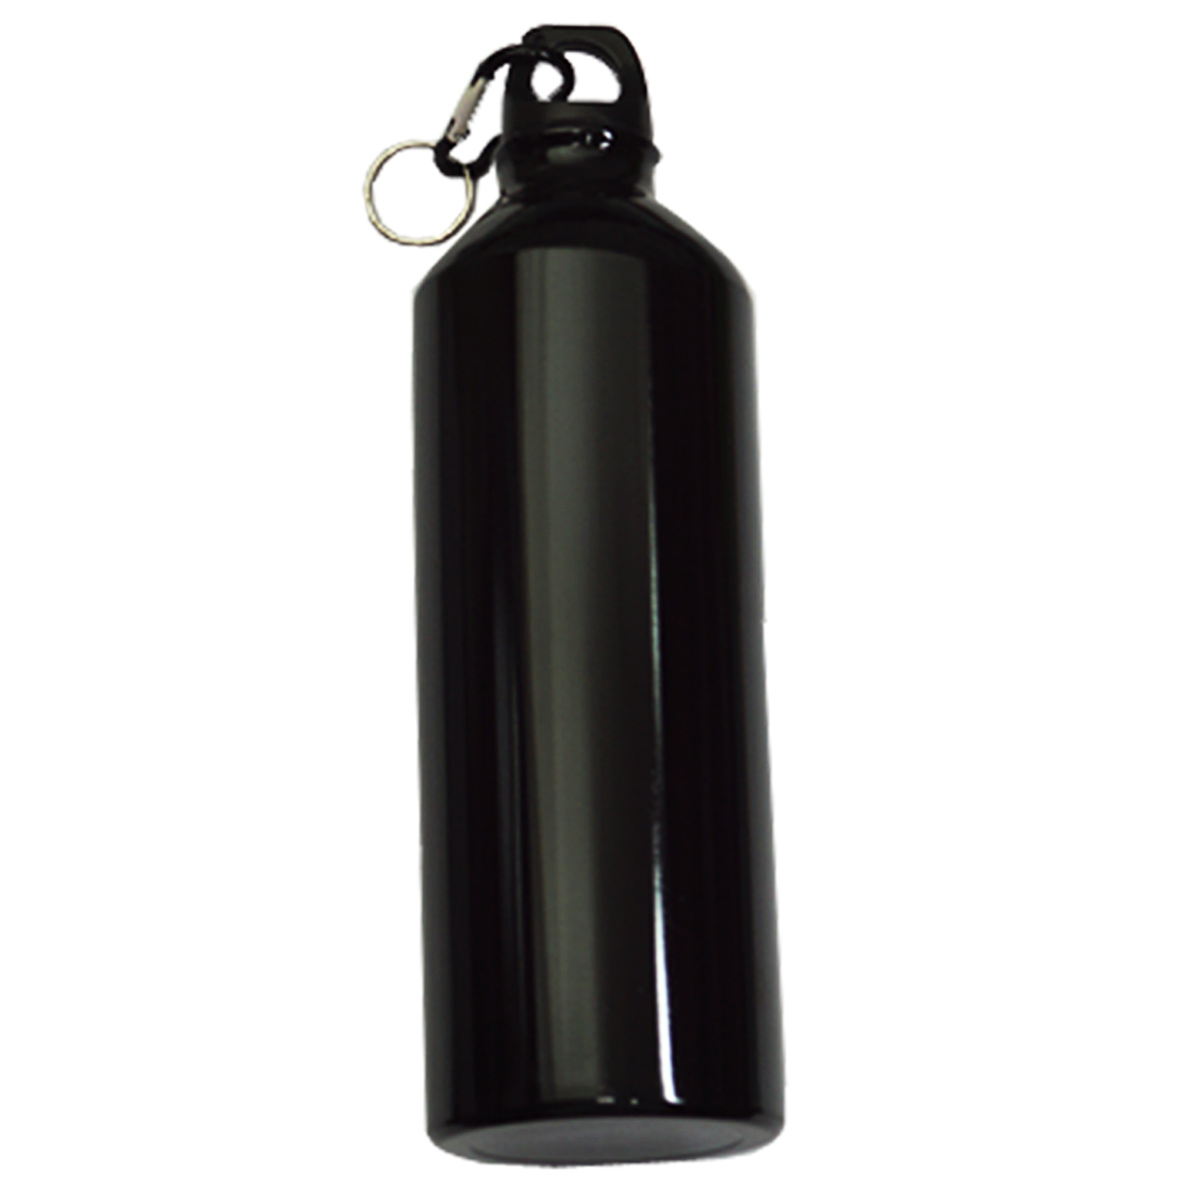 penhouse.in Customize Black Color Stainless Steel Water Bottle (500ml) SKU 96532